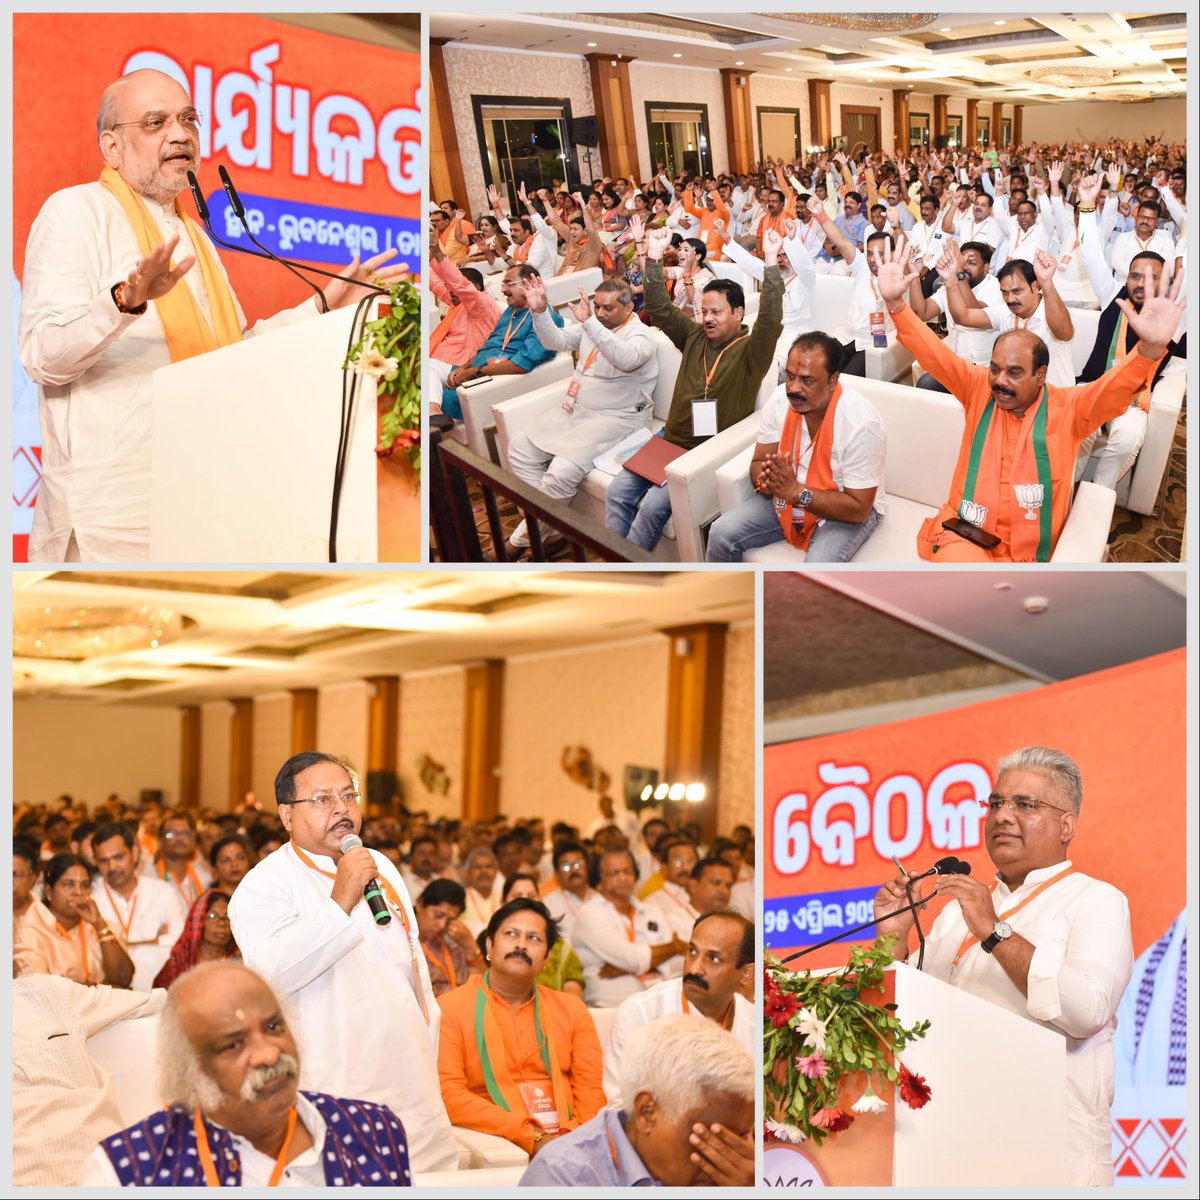 Addressed the BJP workers meeting in Bhubaneswar today in the august presence of Home Minister Shri @AmitShah ji. To protect and preserve the pride of their language, culture, religion and literature, the people of Odisha are determined to vote for the leadership of PM Shri